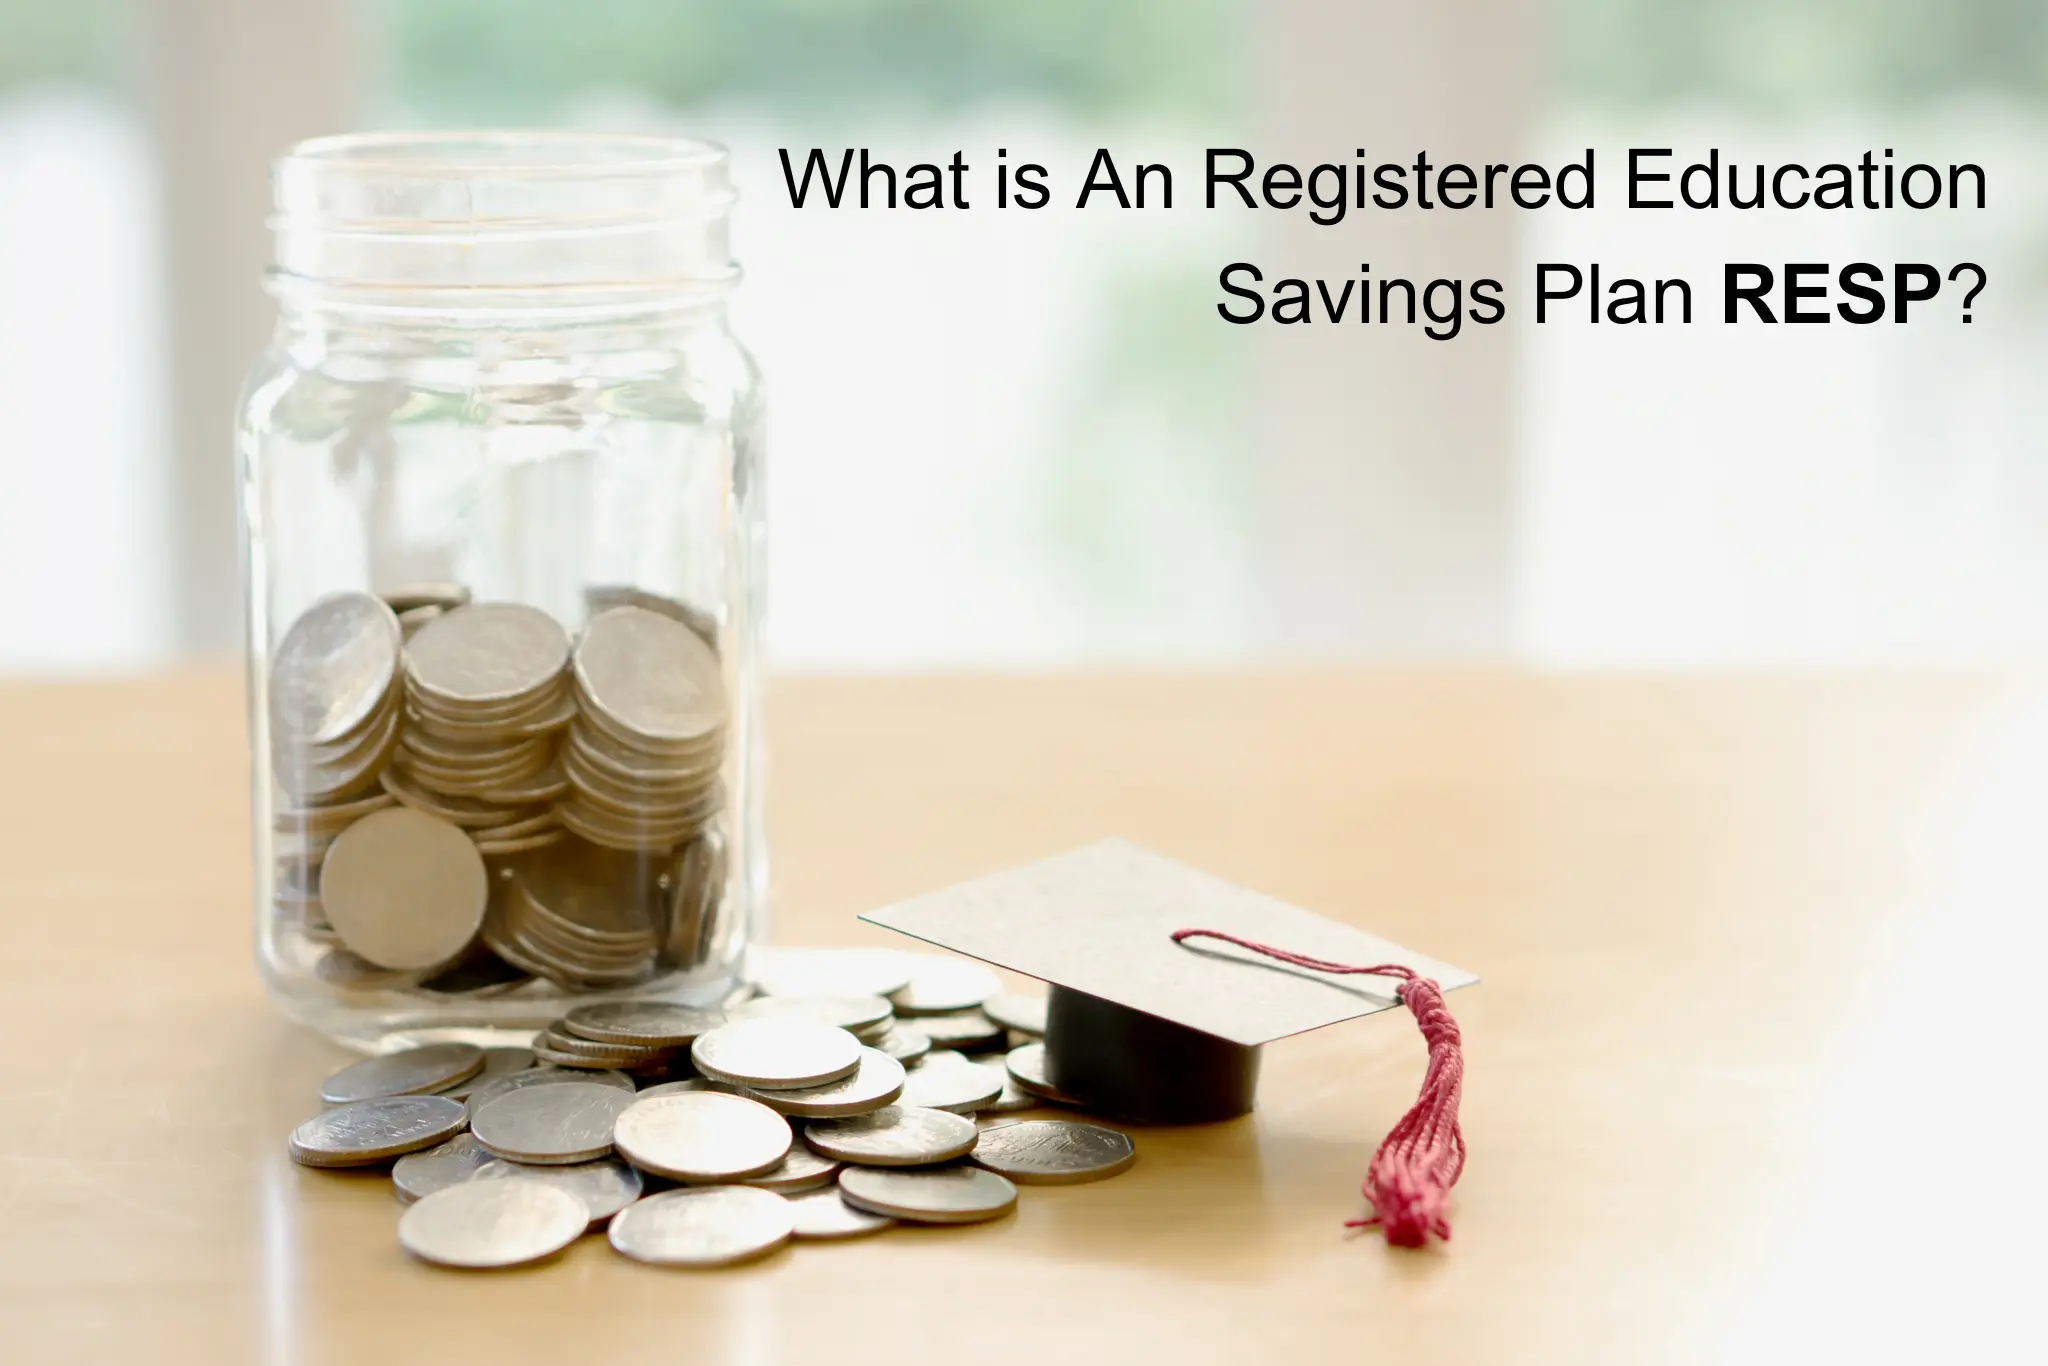 What Is An Registered Education Savings Plan RESP?